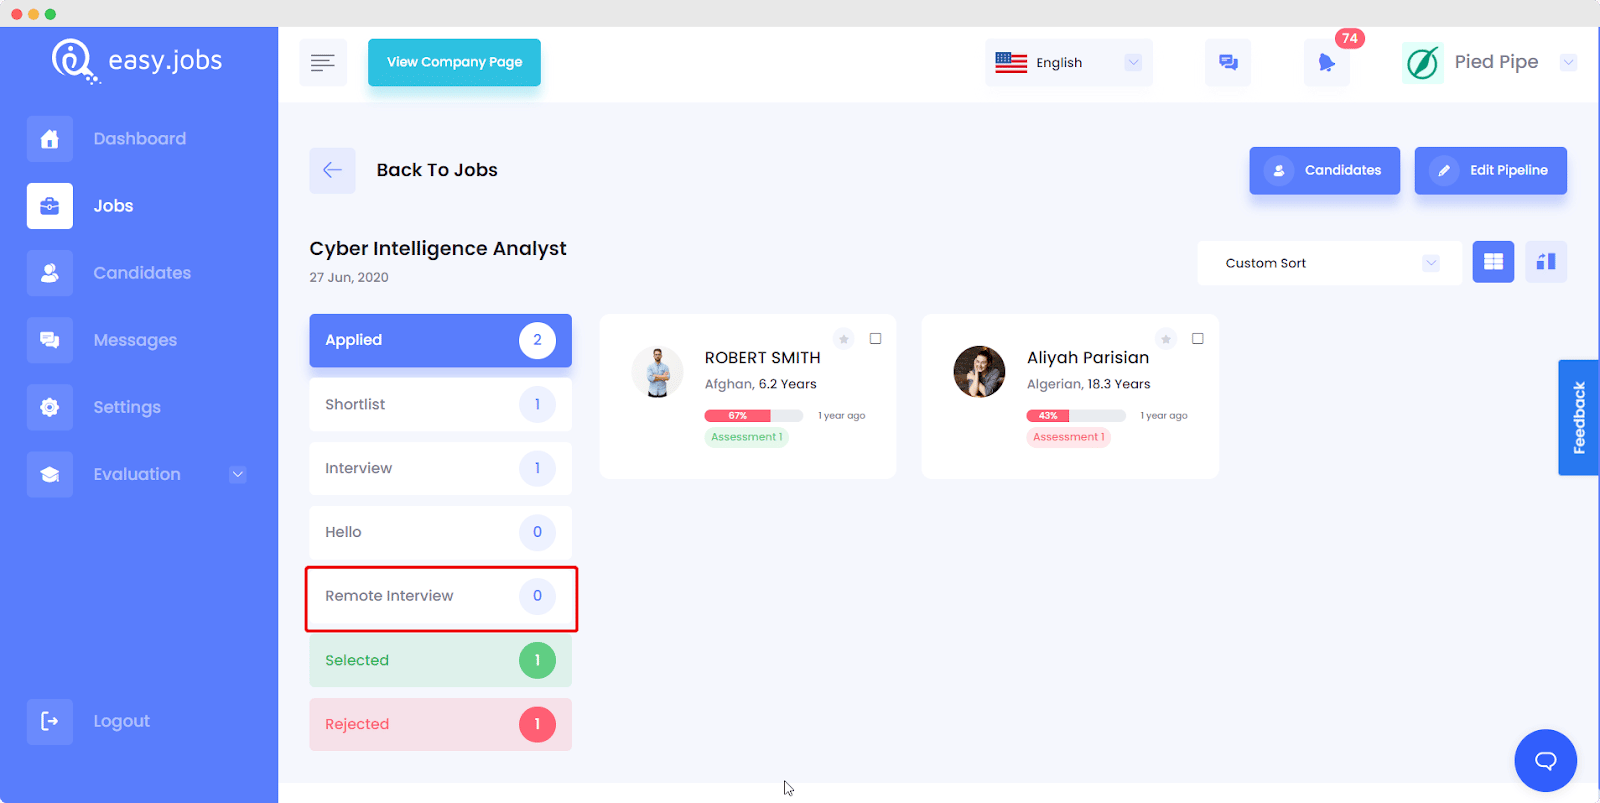 How to Setup Remote Interviews In easy.jobs?